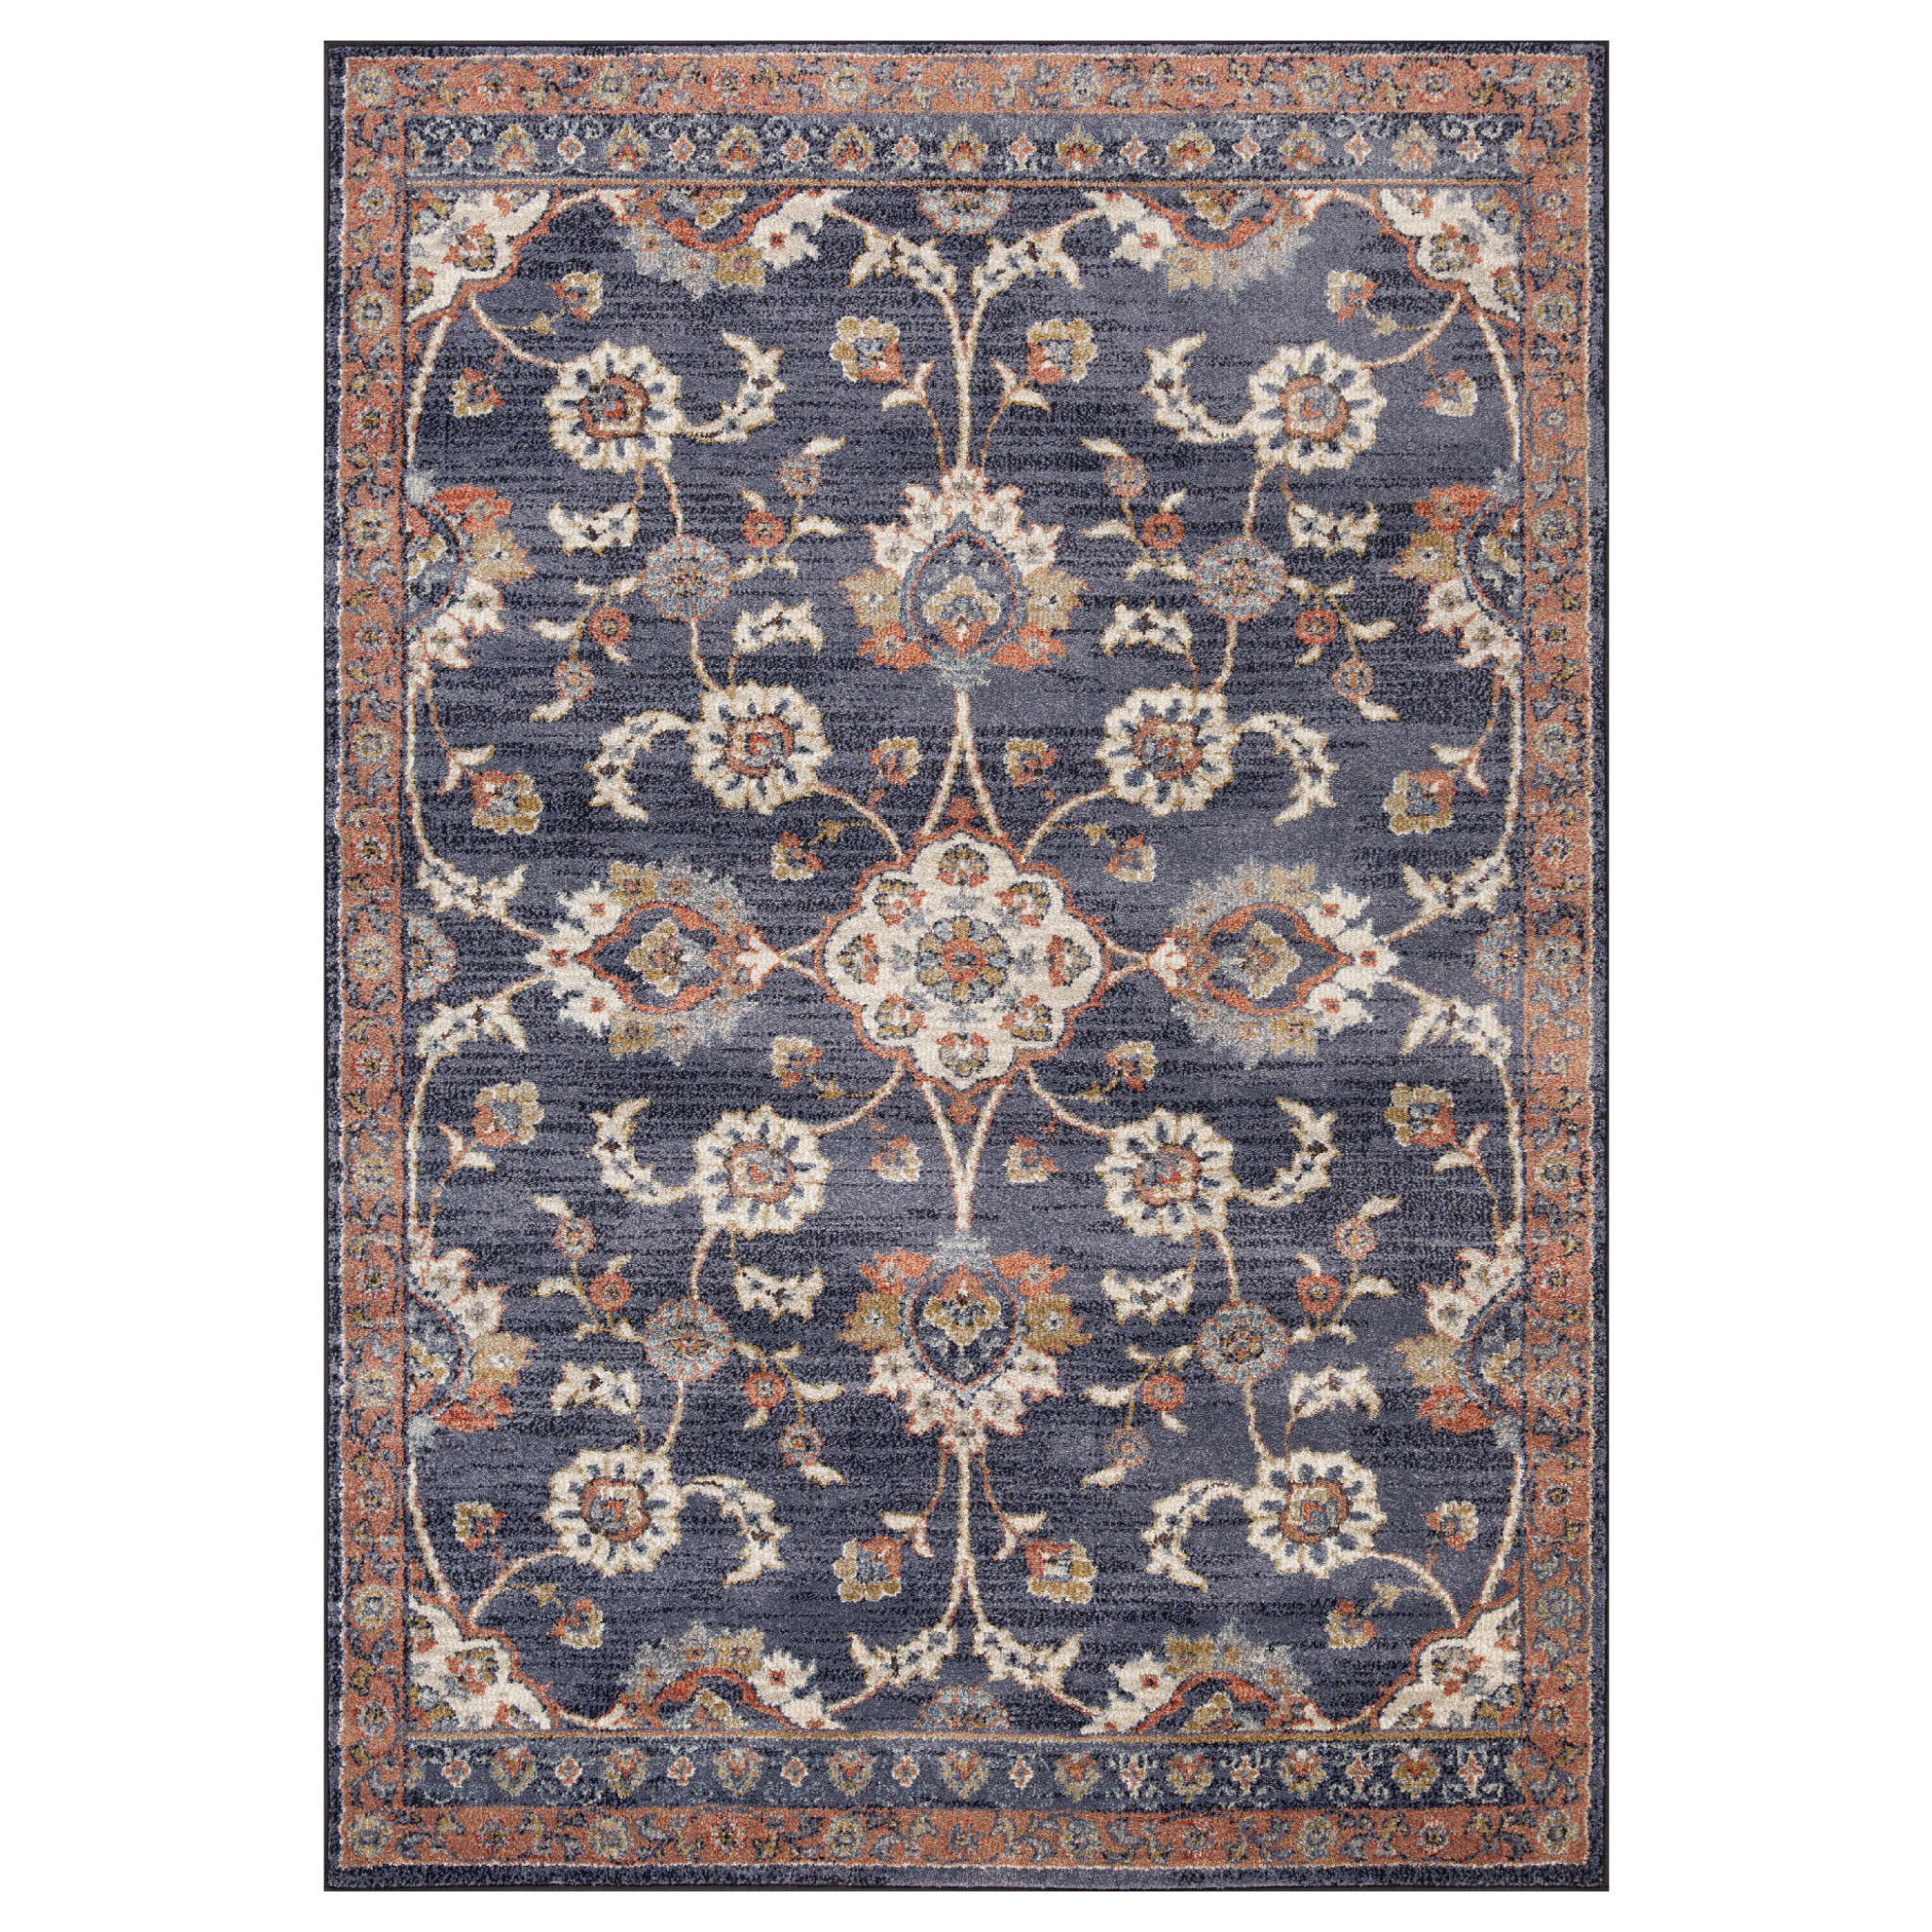 8' x 10' Navy Blue Floral Power Loom Area Rug With Fringe-532157-1